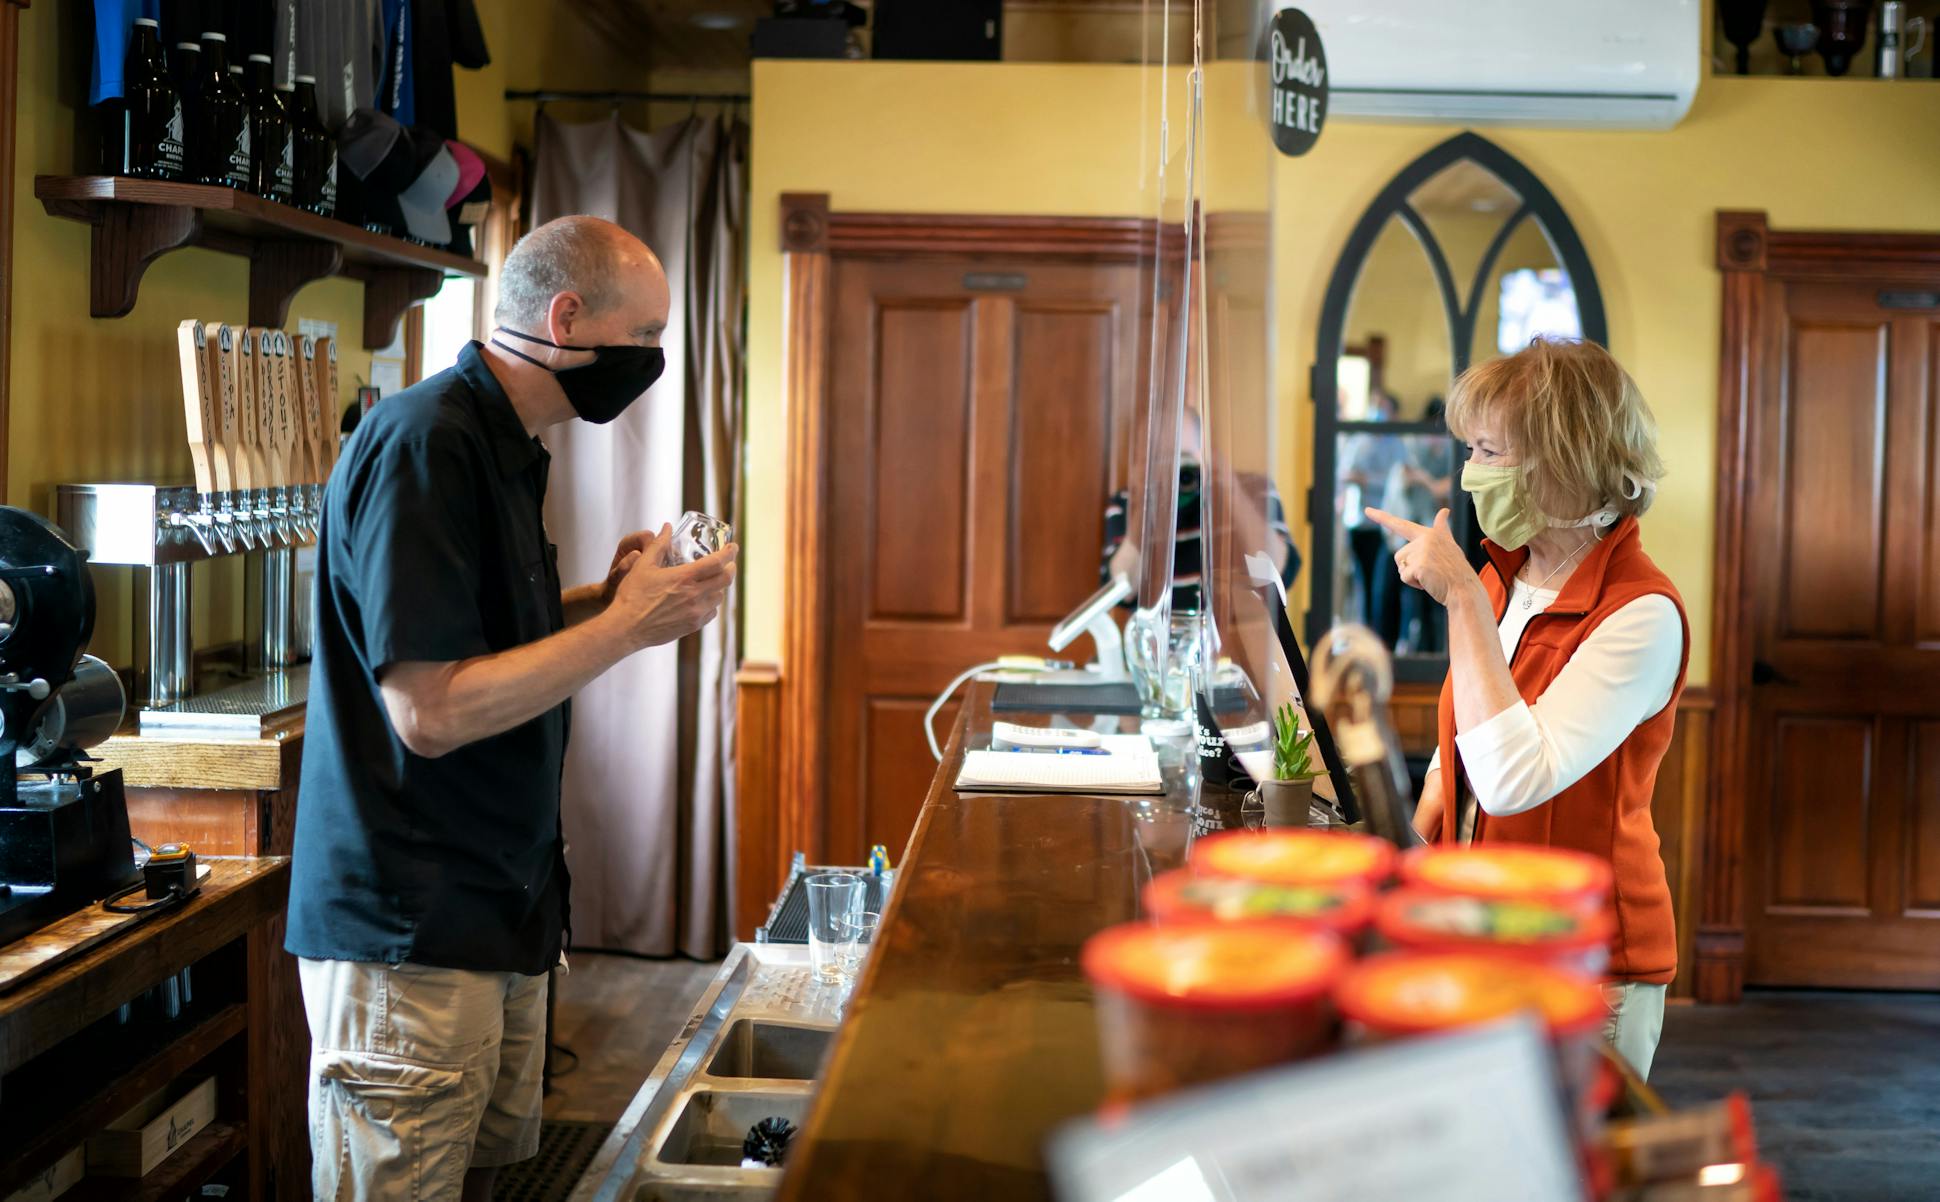 Sen. Tina Smith ordered a Blood Orange Pale Ale from co-owner Steve Schmidt, as she visited Chapel Brewing in Dundas, Minn., along with U.S. Rep. Angie Craig.